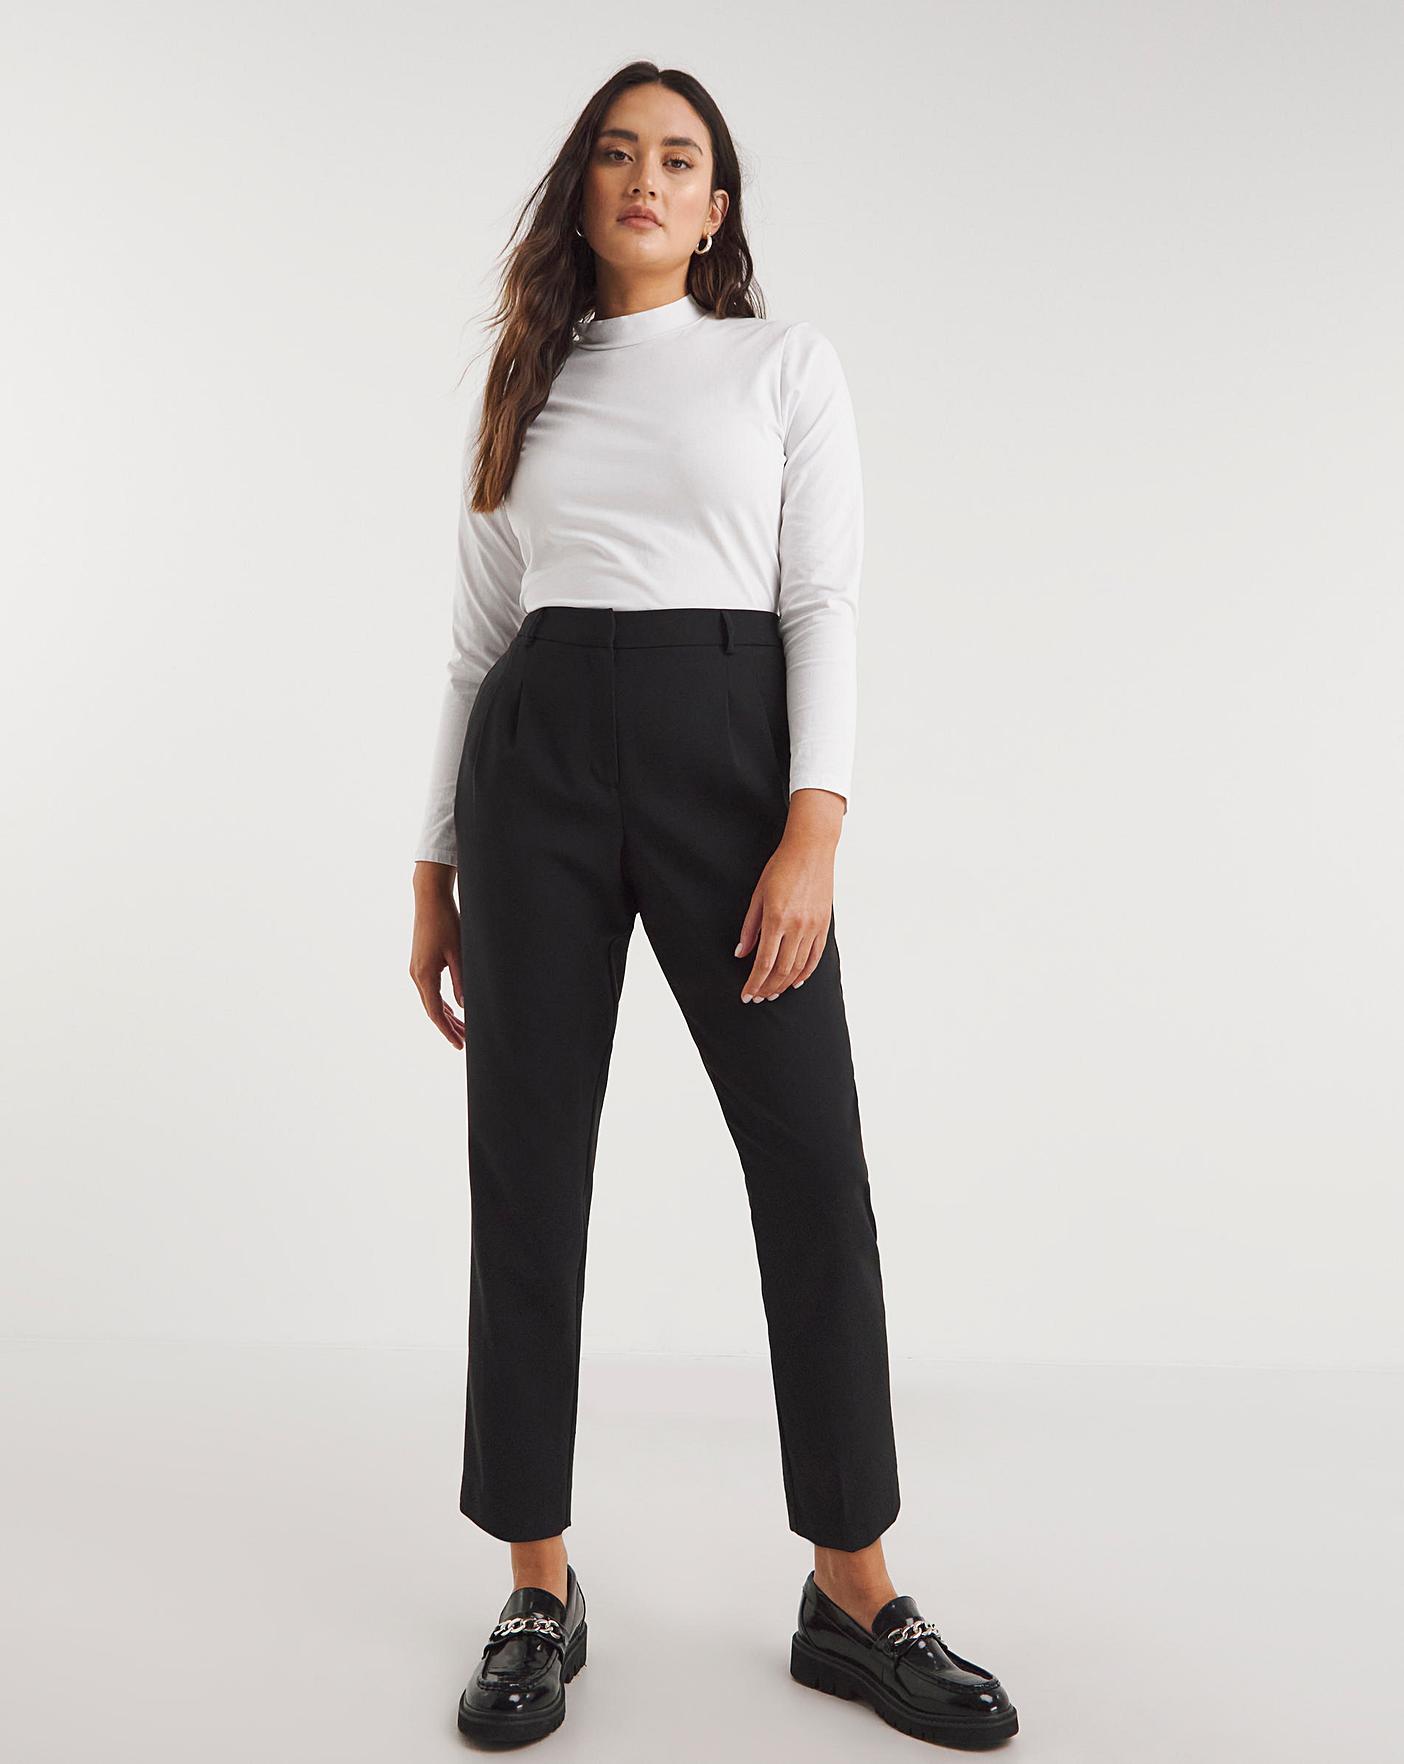 Kaley' magic stretch trousers – One Look Clothing